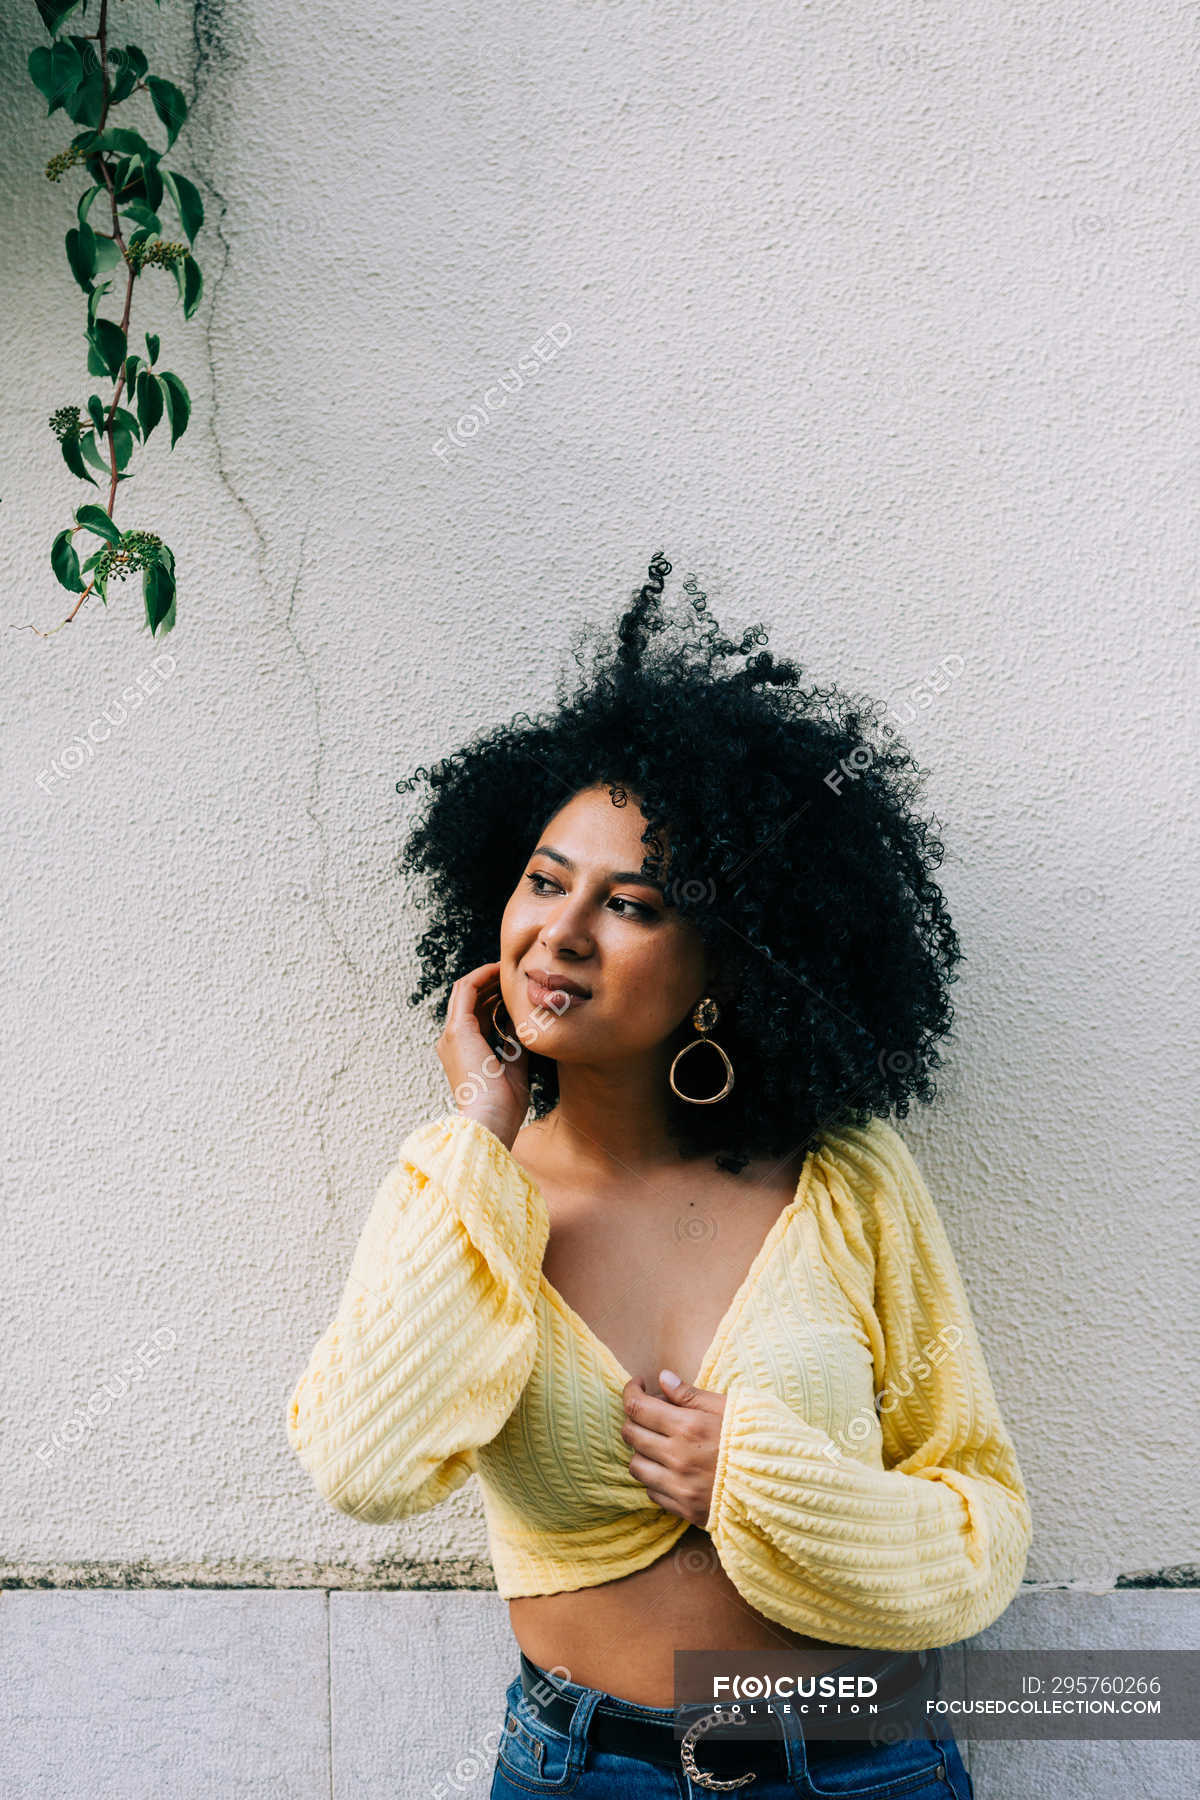 Pretty ethnic woman in yellow crop top with black curly hair looking away  on street — stylish, hairstyle - Stock Photo | #295760266